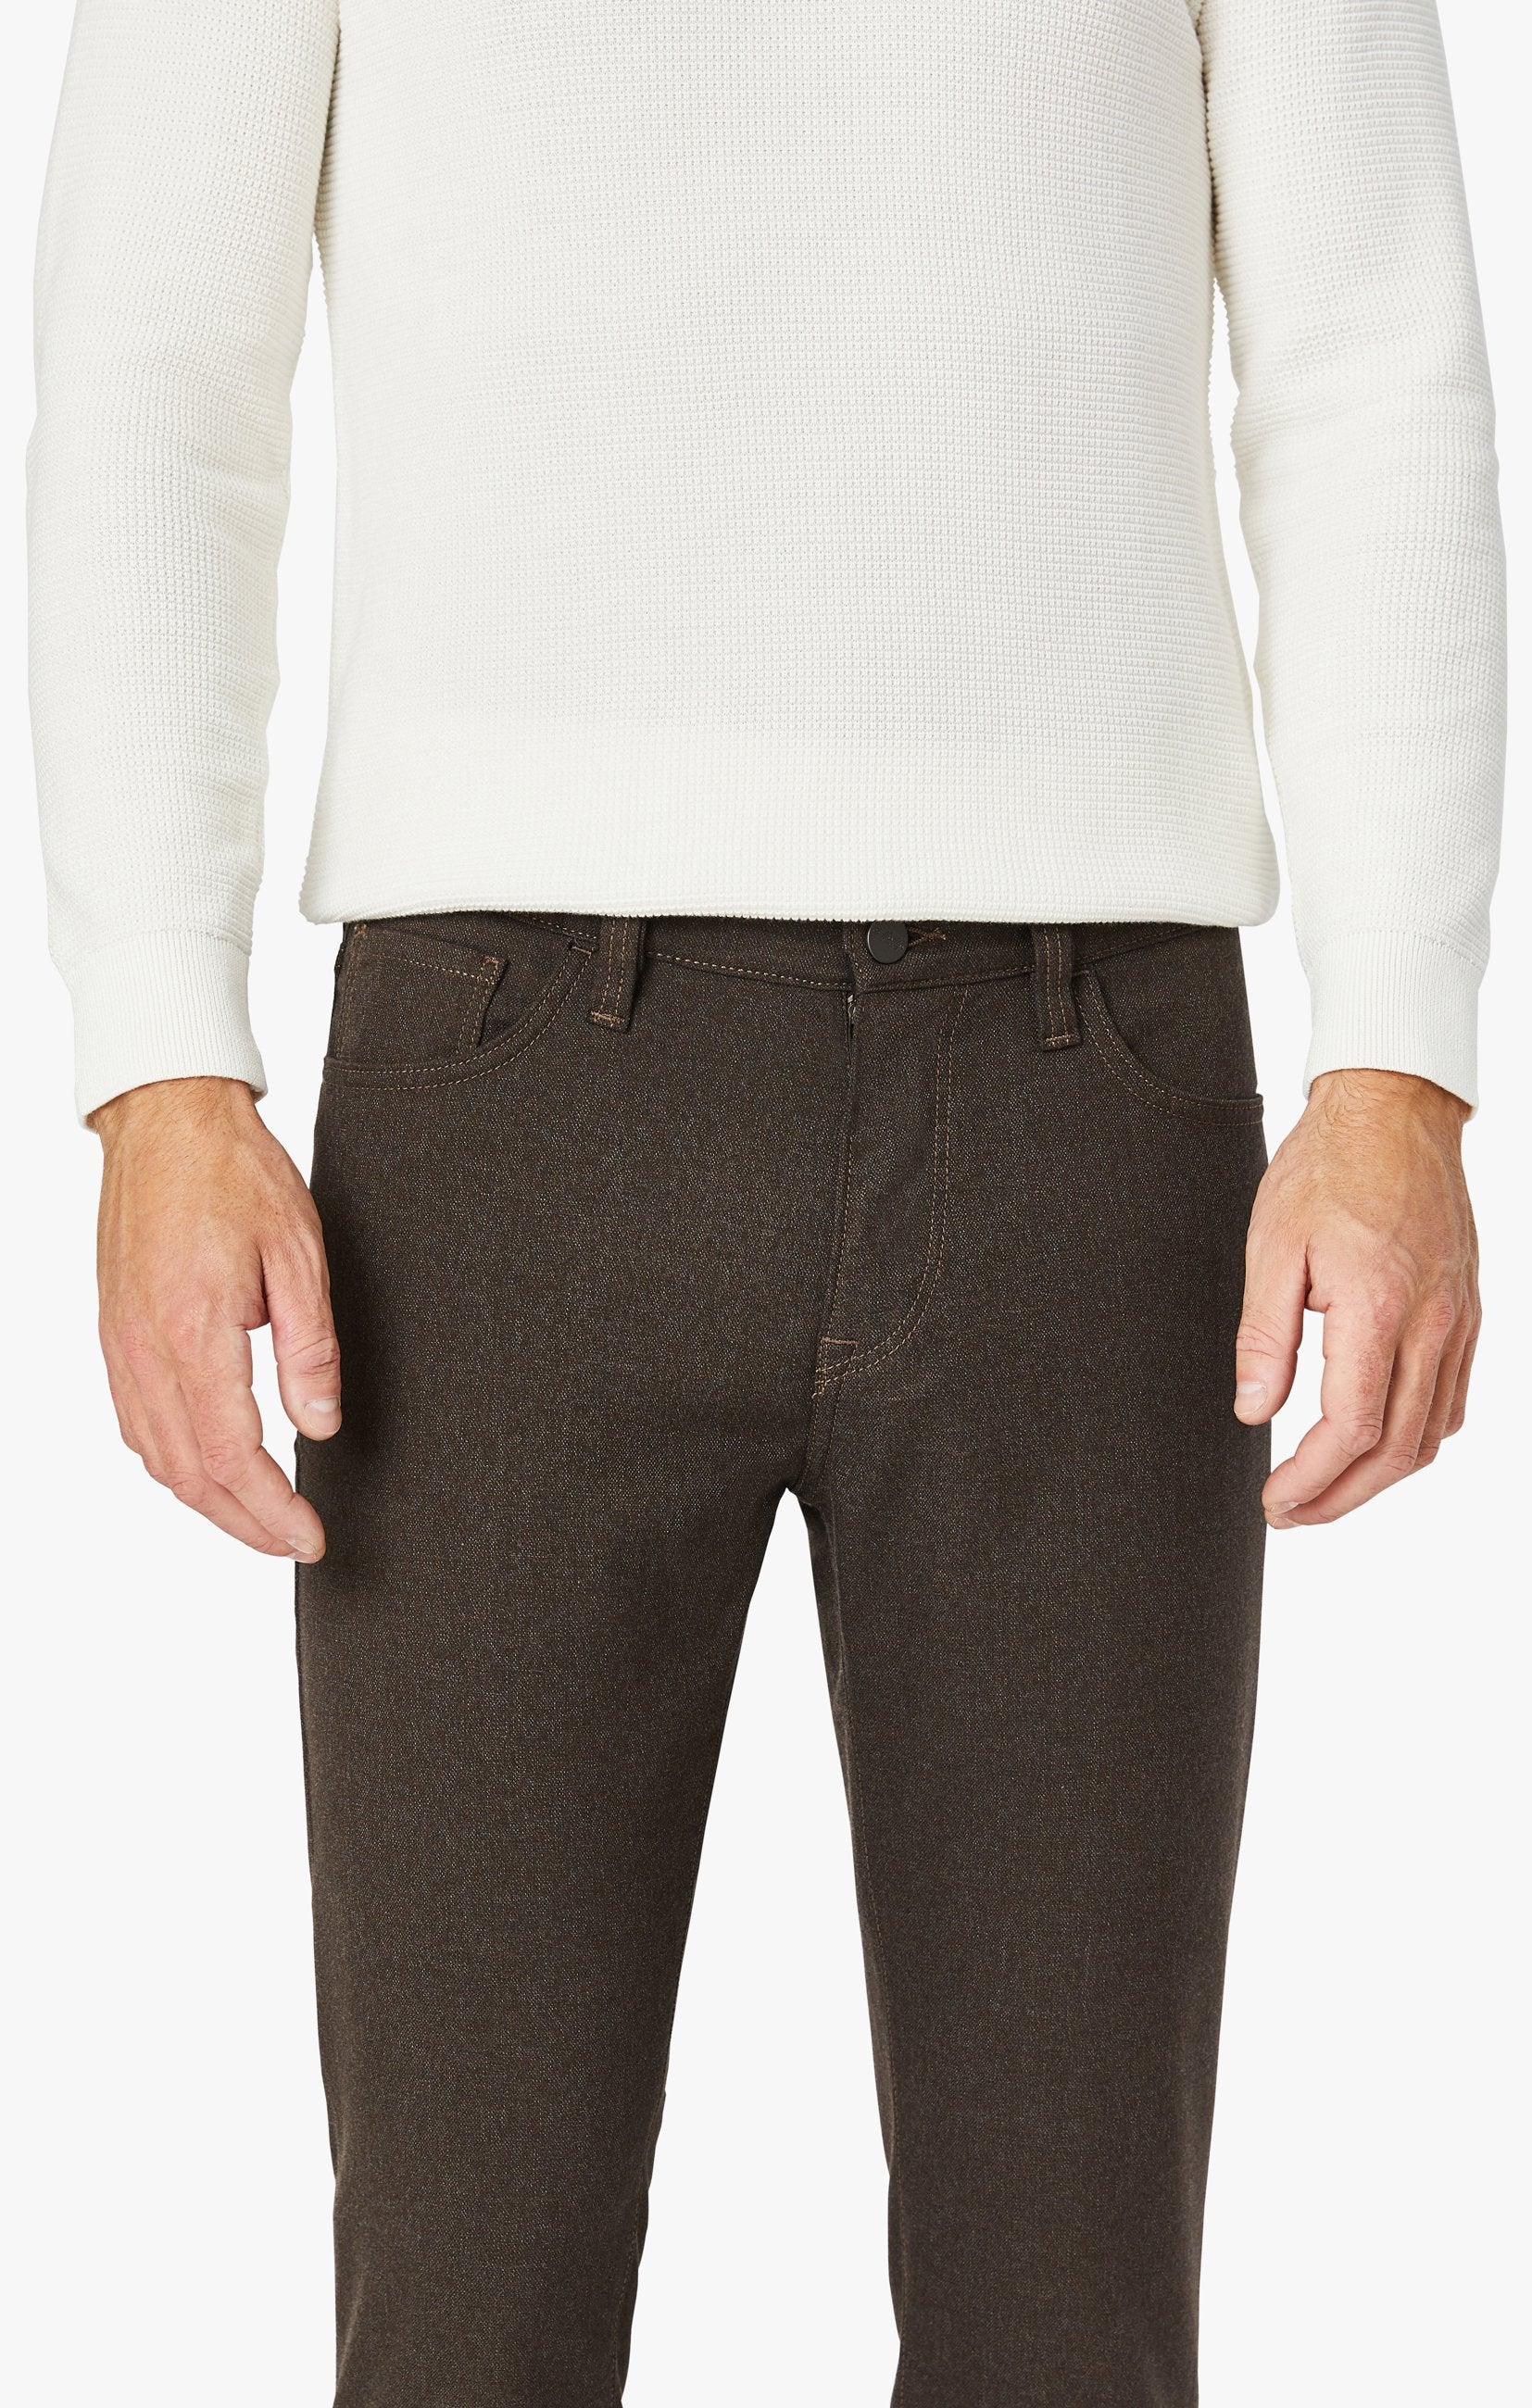 Courage Straight Leg Pants In Coffee Supreme Image 10